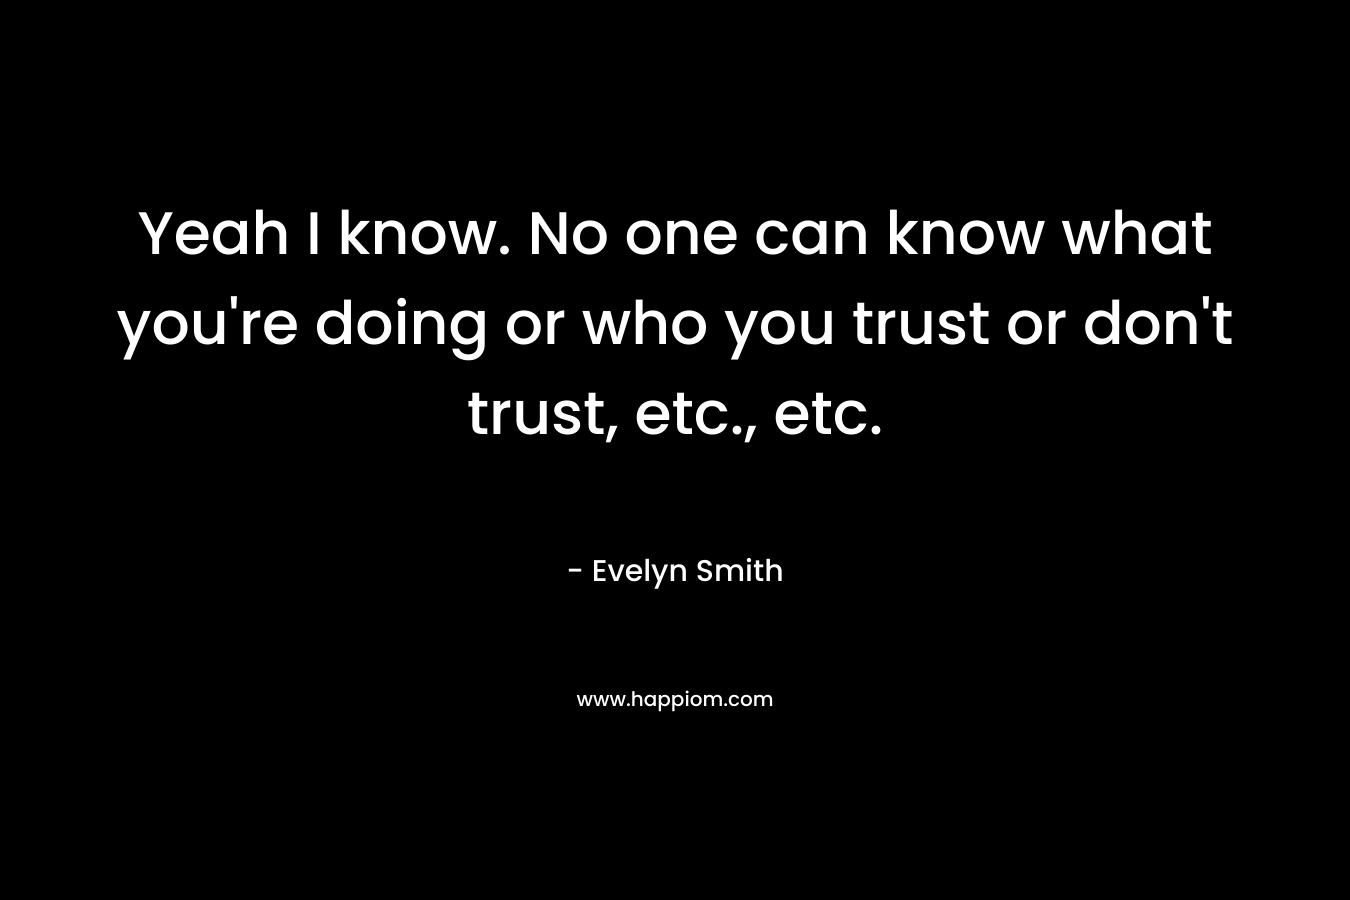 Yeah I know. No one can know what you’re doing or who you trust or don’t trust, etc., etc. – Evelyn Smith